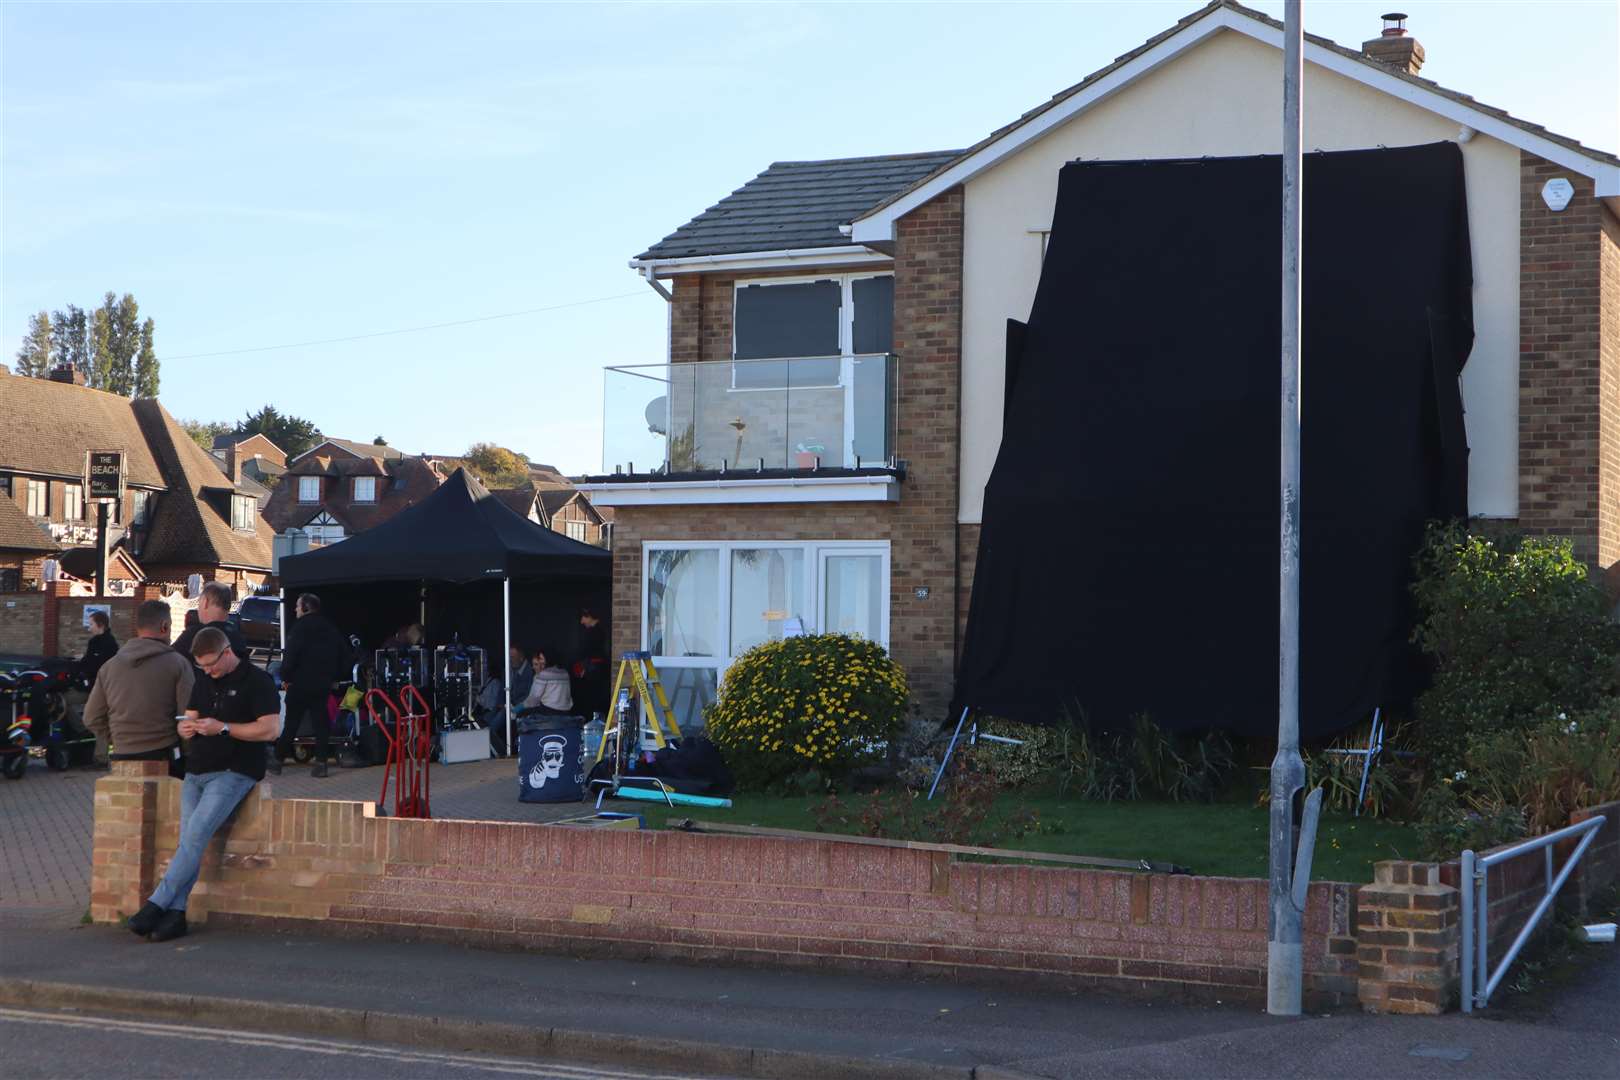 This house on The Leas at Minster is featured in the latest series of the BBC drama Silent Witness although the address was changed to Markham Avenue, Southbay